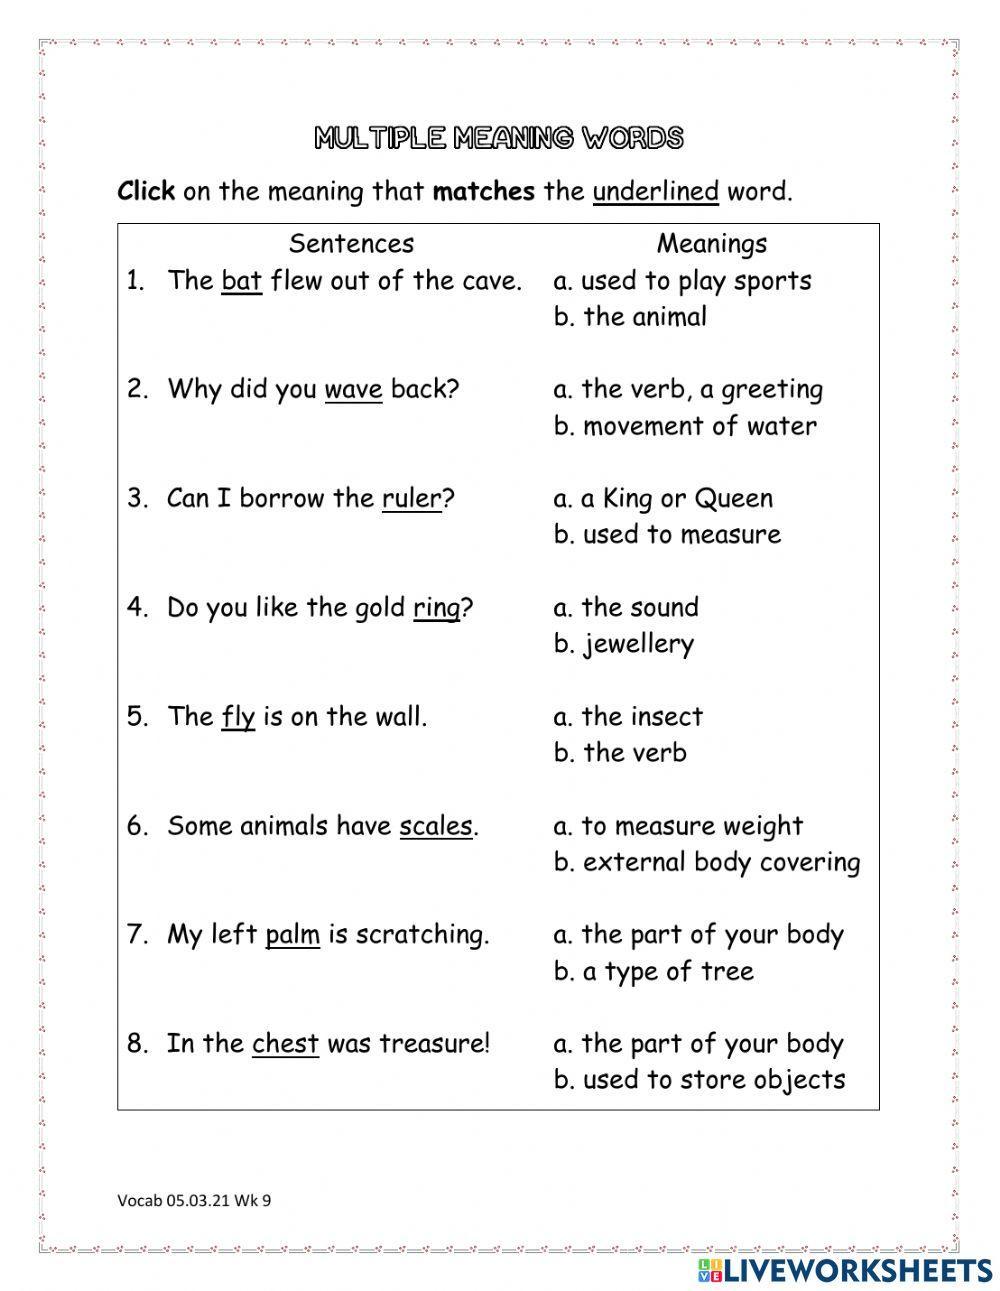 multiple-meaning-words-online-activity-live-worksheets